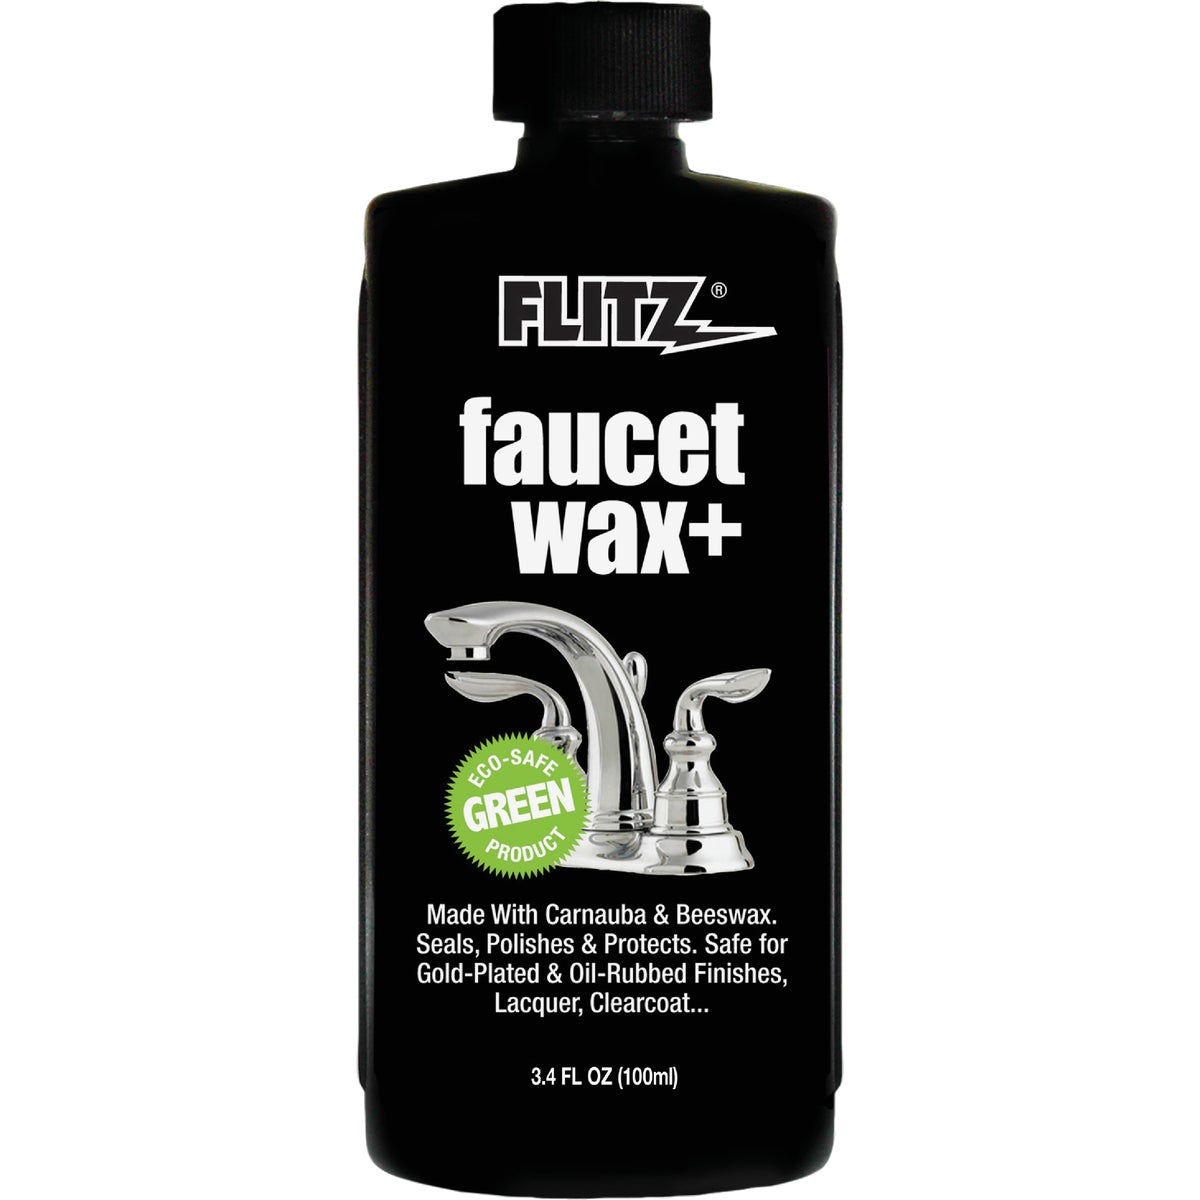 Item 602798, Faucet wax seals, polishes, and protects.